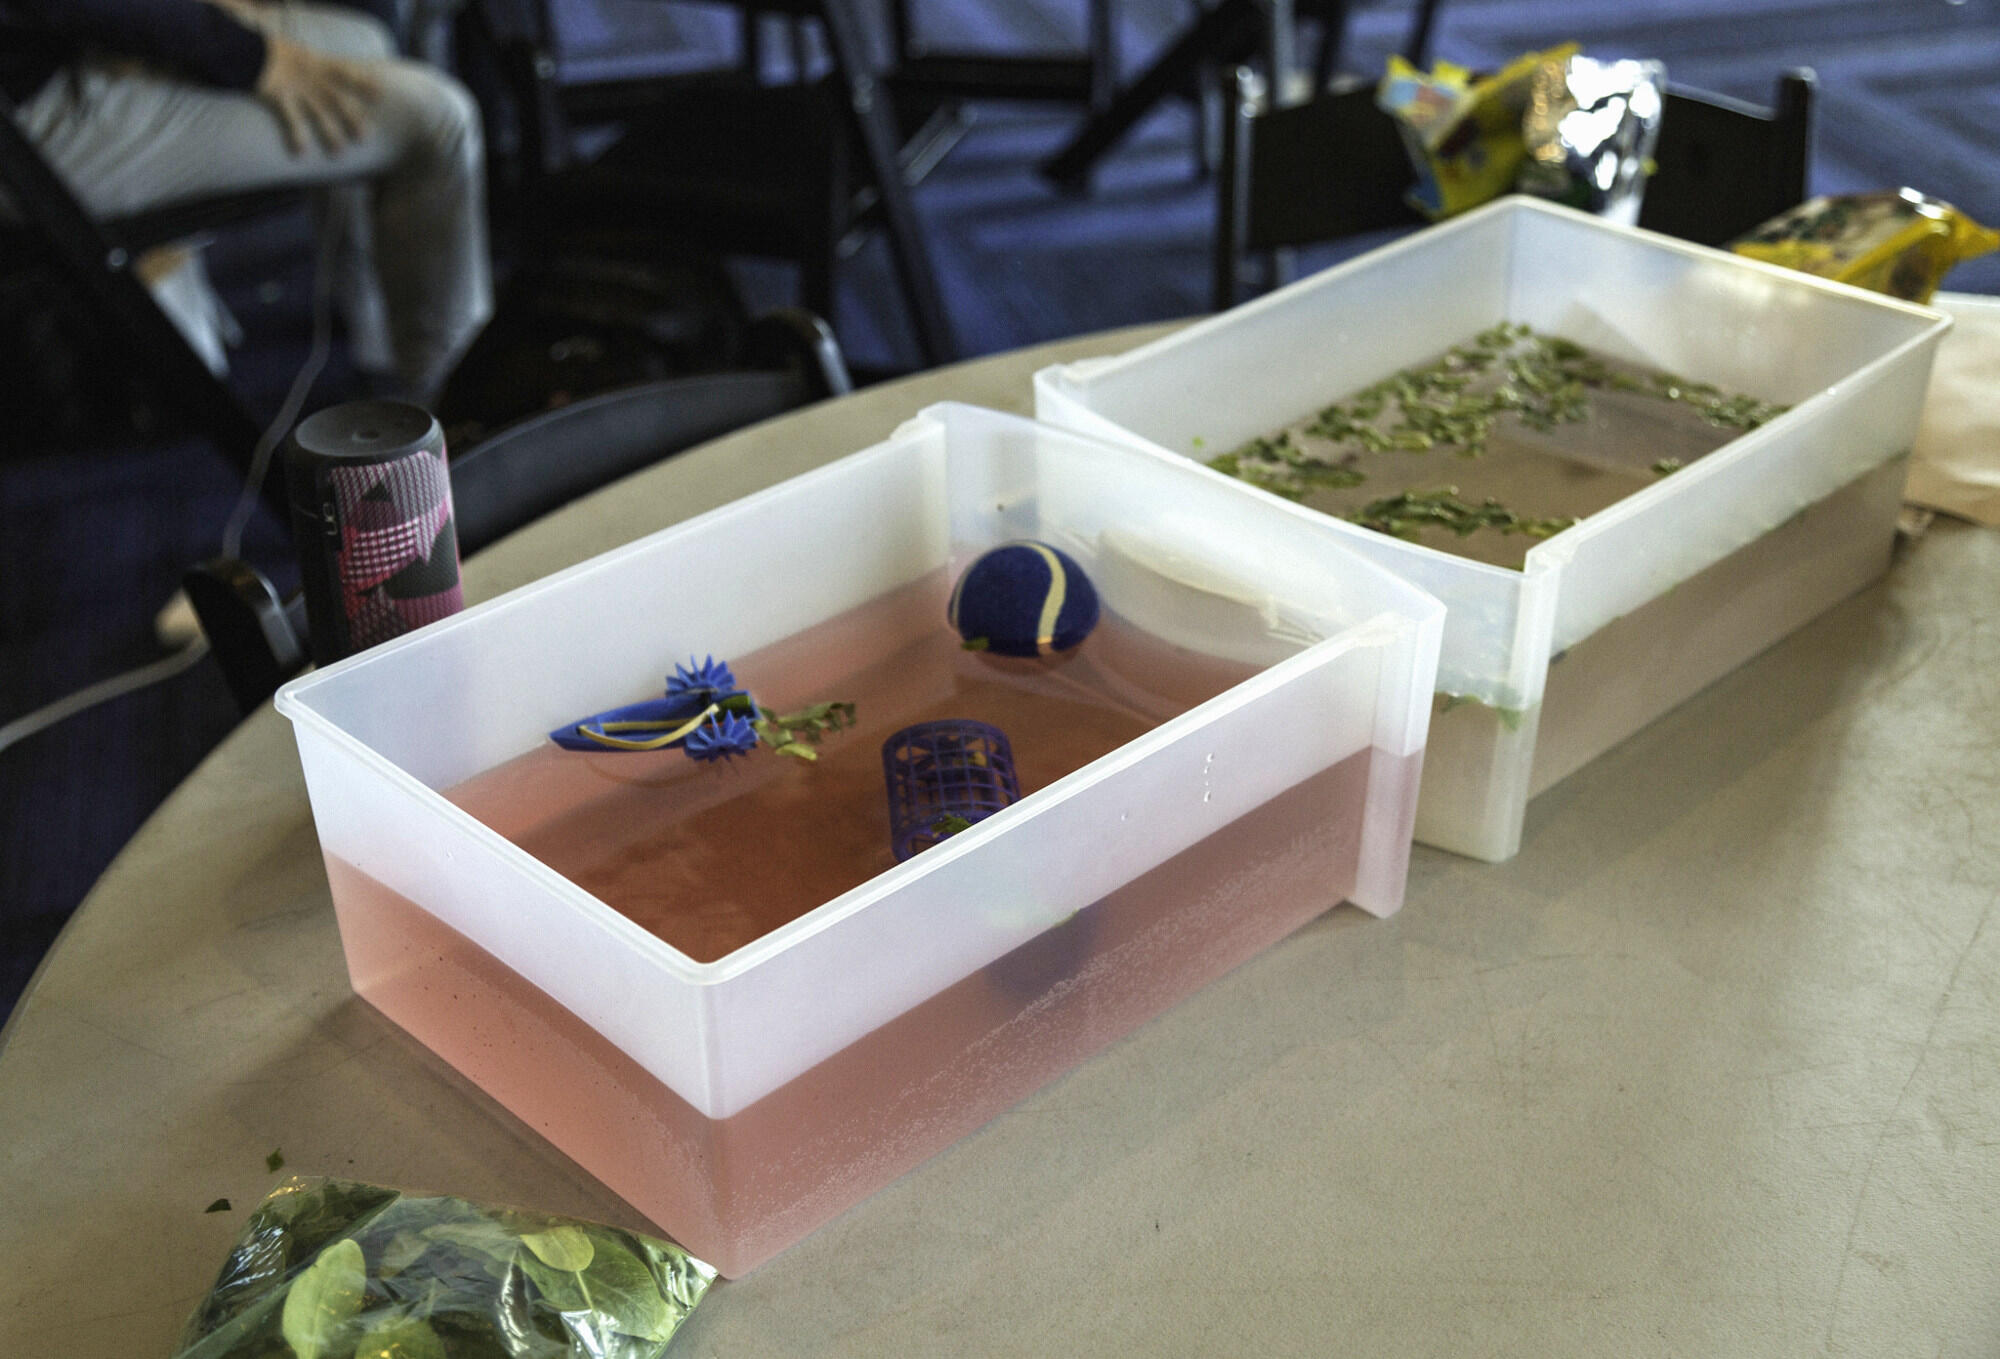 Multidisciplinary teams had 24 hours to learn from mentors, brainstorm, and generate solutions to some of the world’s most pressing problems at EarthHacks. Depending upon the problem, proposed solutions could involve any type of material, including the water-filled bins seen here.